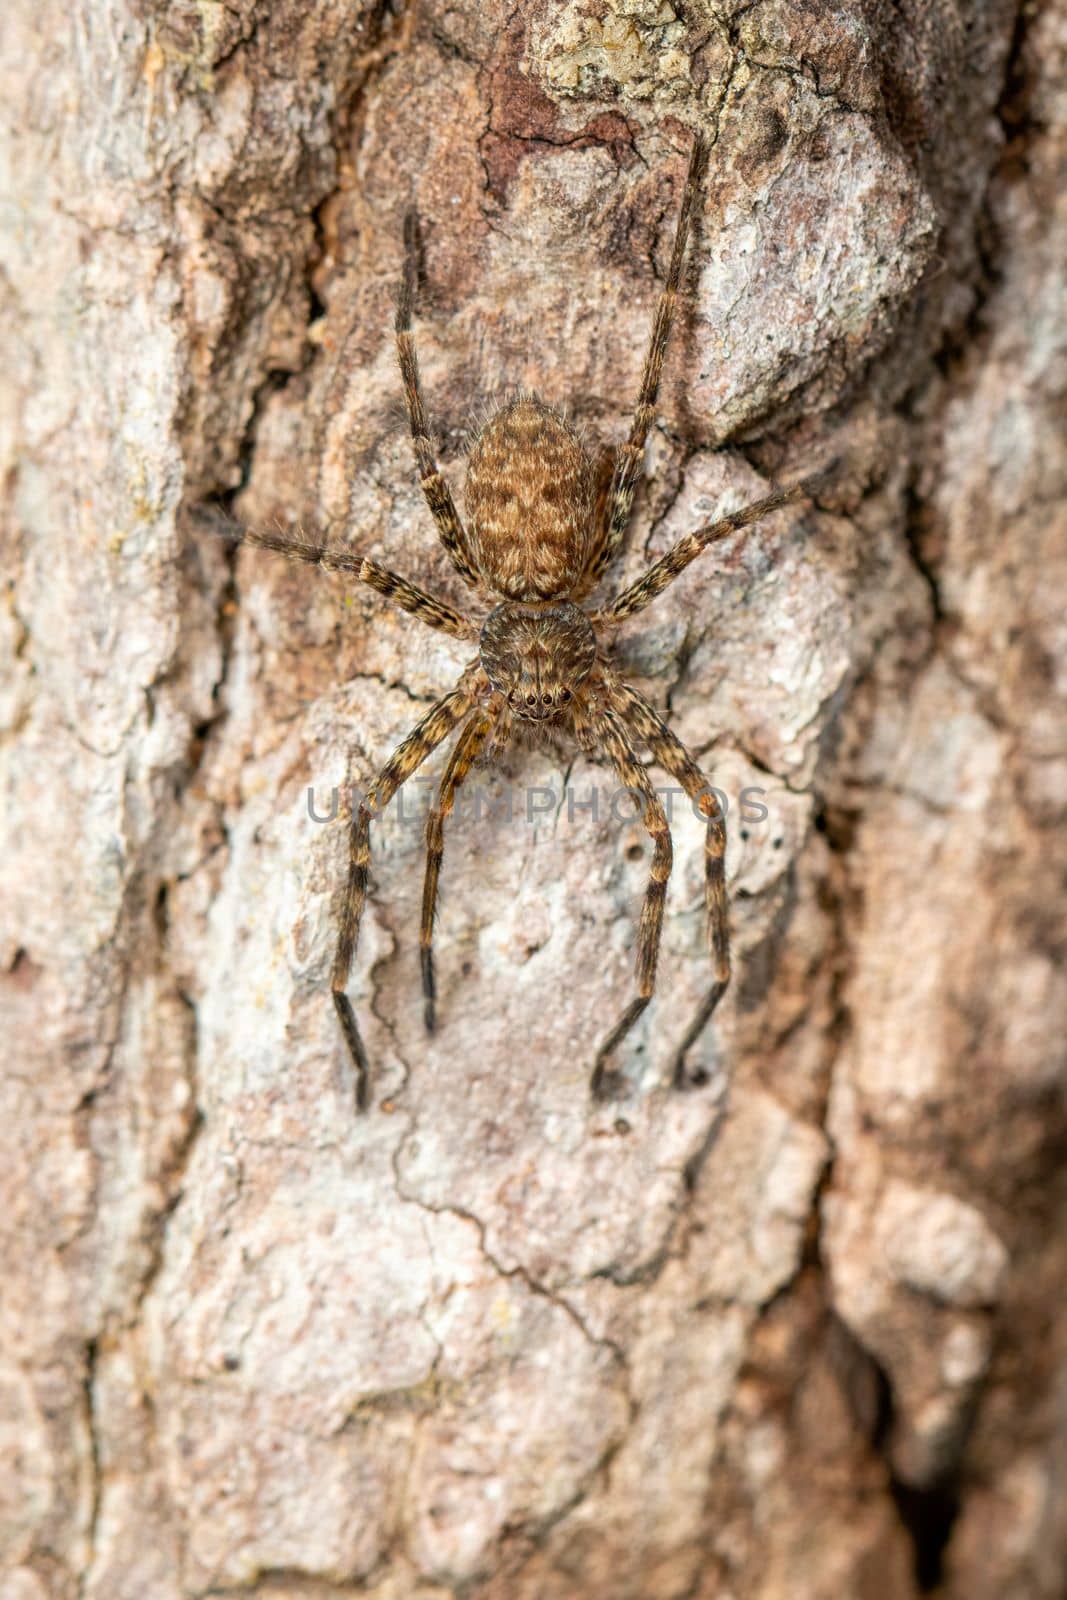 Image of a brown spider on a tree. Insect. Animal.